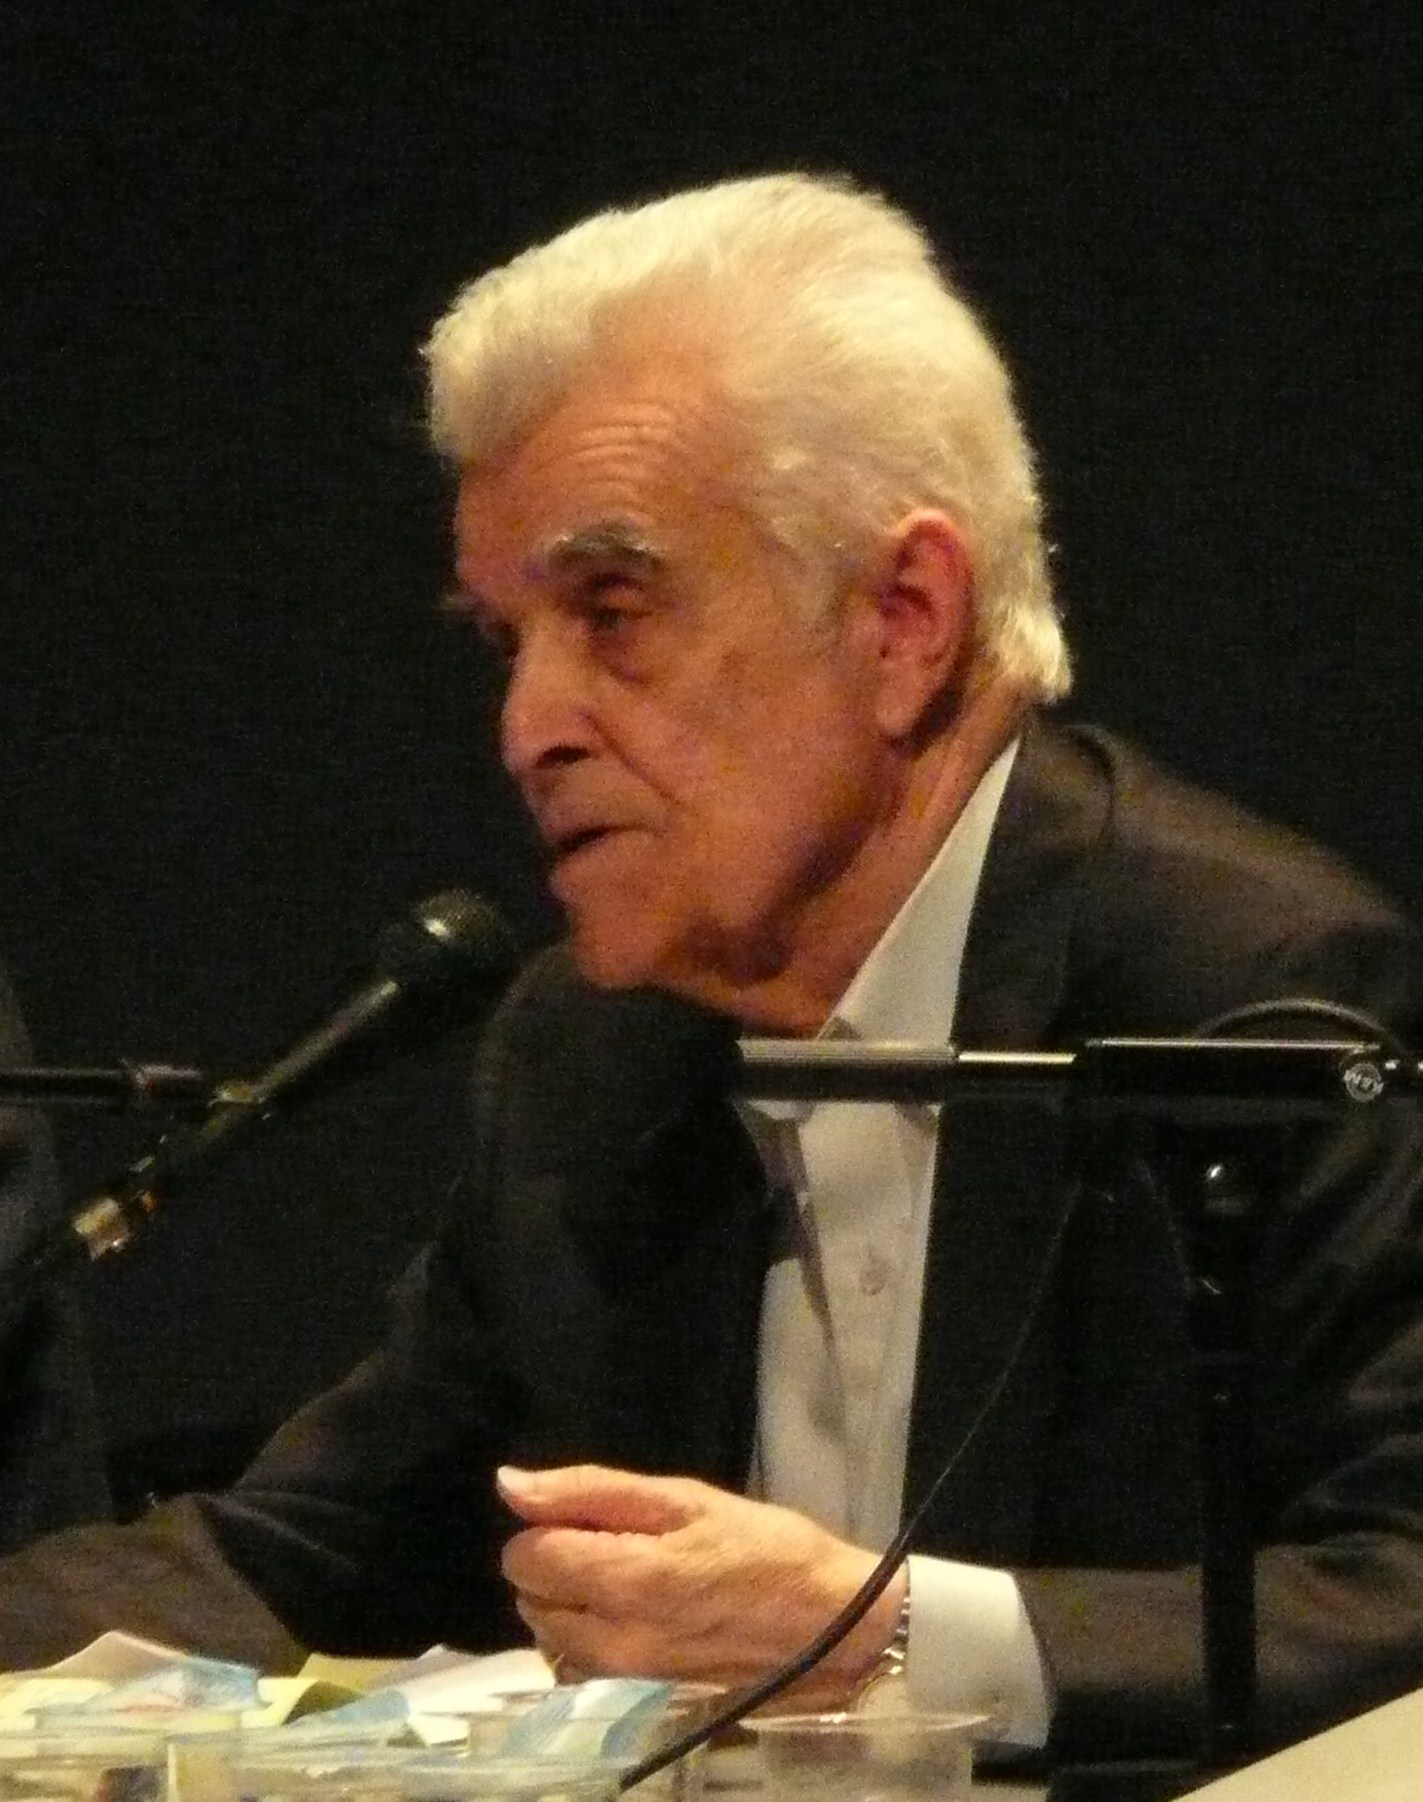 French philosopher René Girard during a colloquium in Paris in 2007. Girard, who wrote about religion and violence, died Nov. 4. PHOTO: Wikipedia/Vicq.